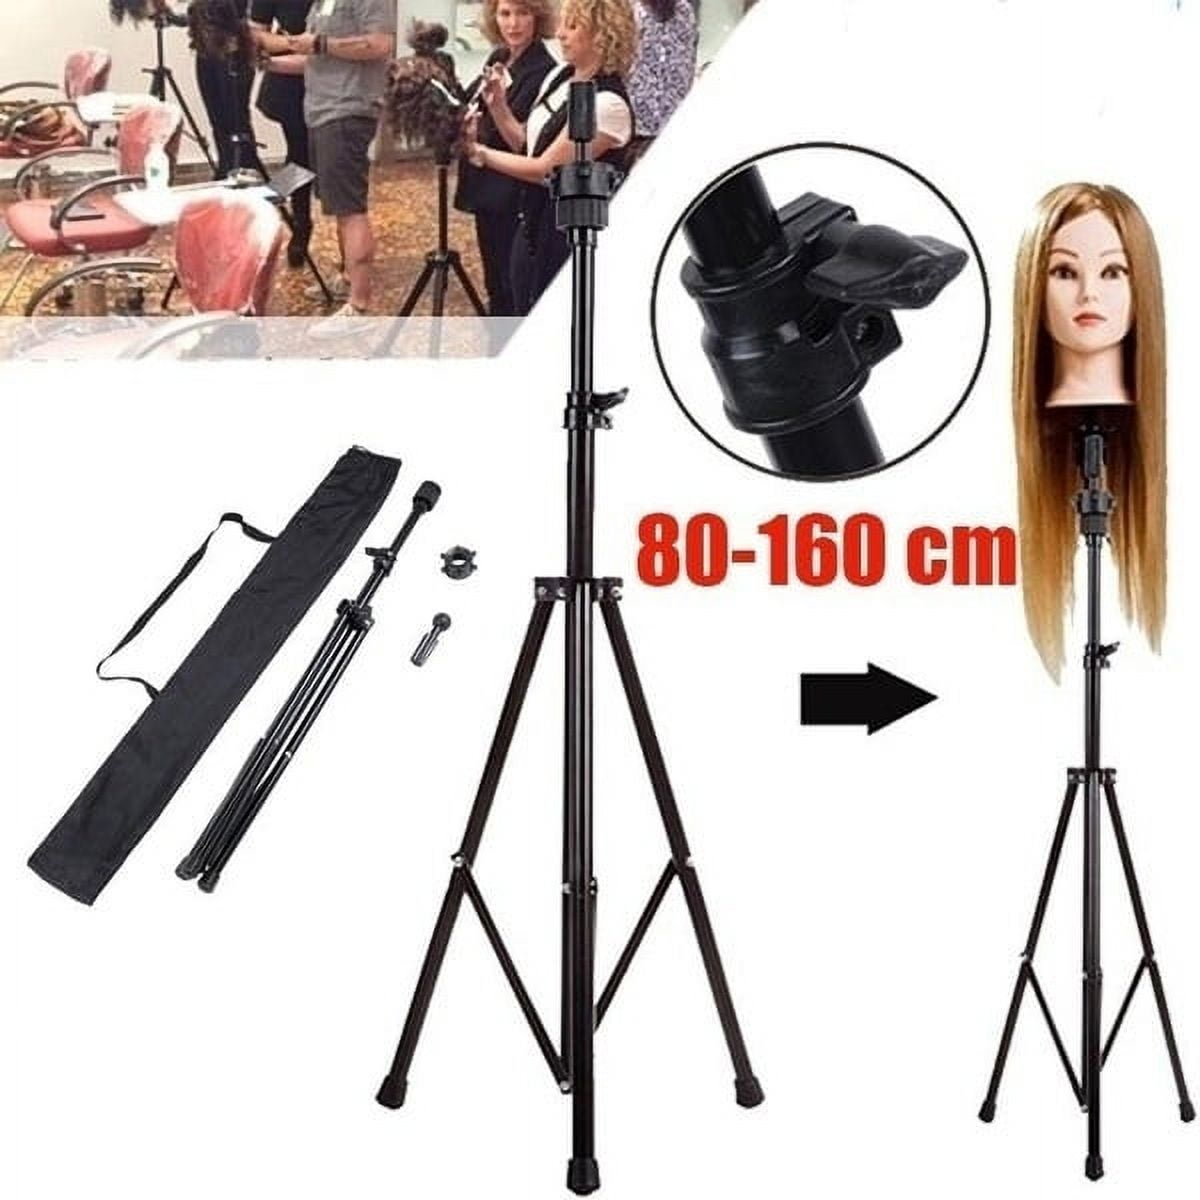 Mannequin Training Head Stand Wig Holder Stand Desk Table Clamp Metal Hair  Accessory Tool